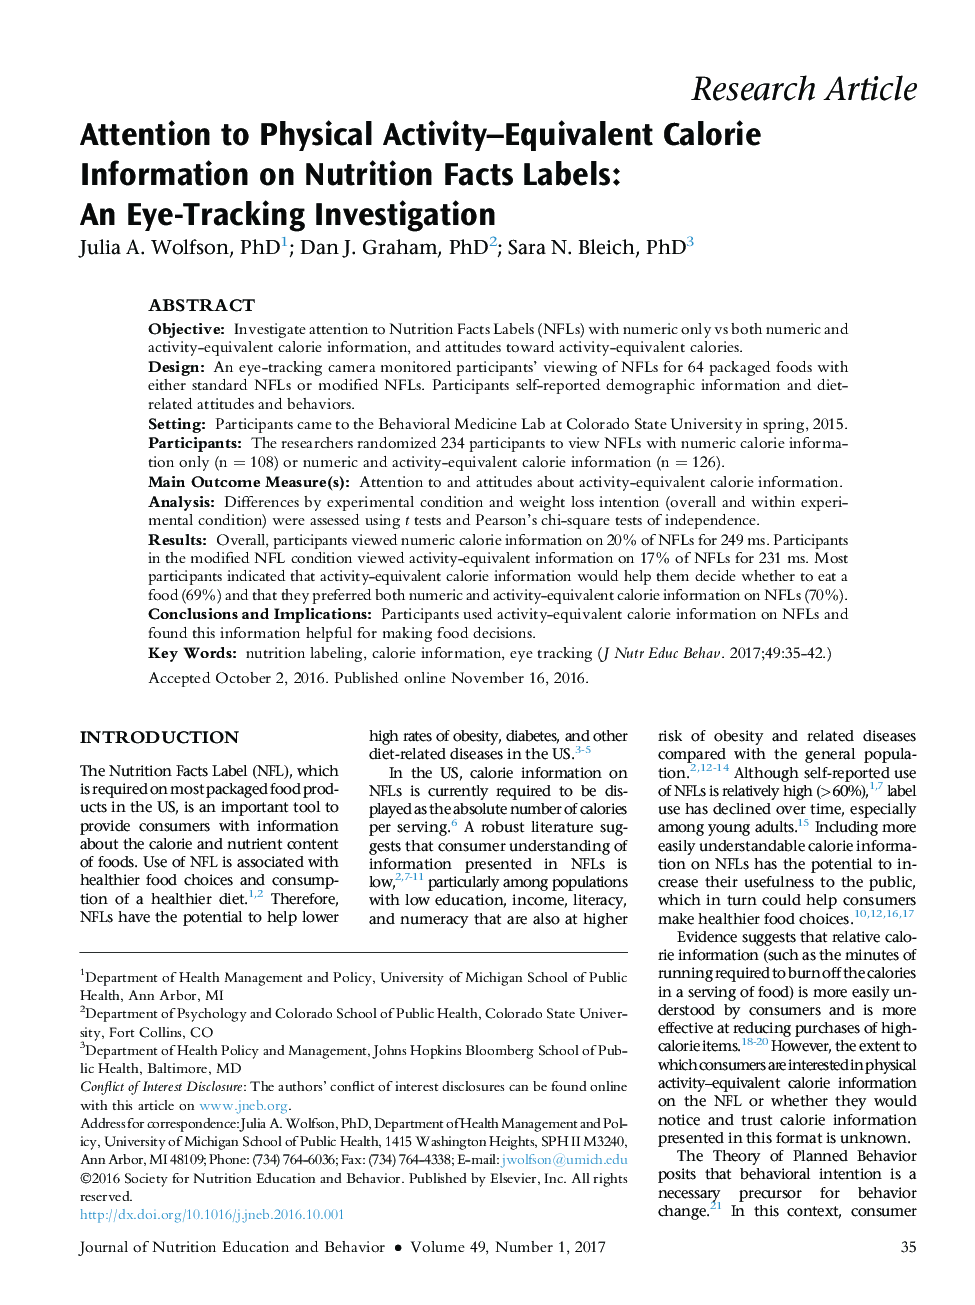 Attention to Physical Activity-Equivalent Calorie Information on Nutrition Facts Labels: AnÂ Eye-Tracking Investigation